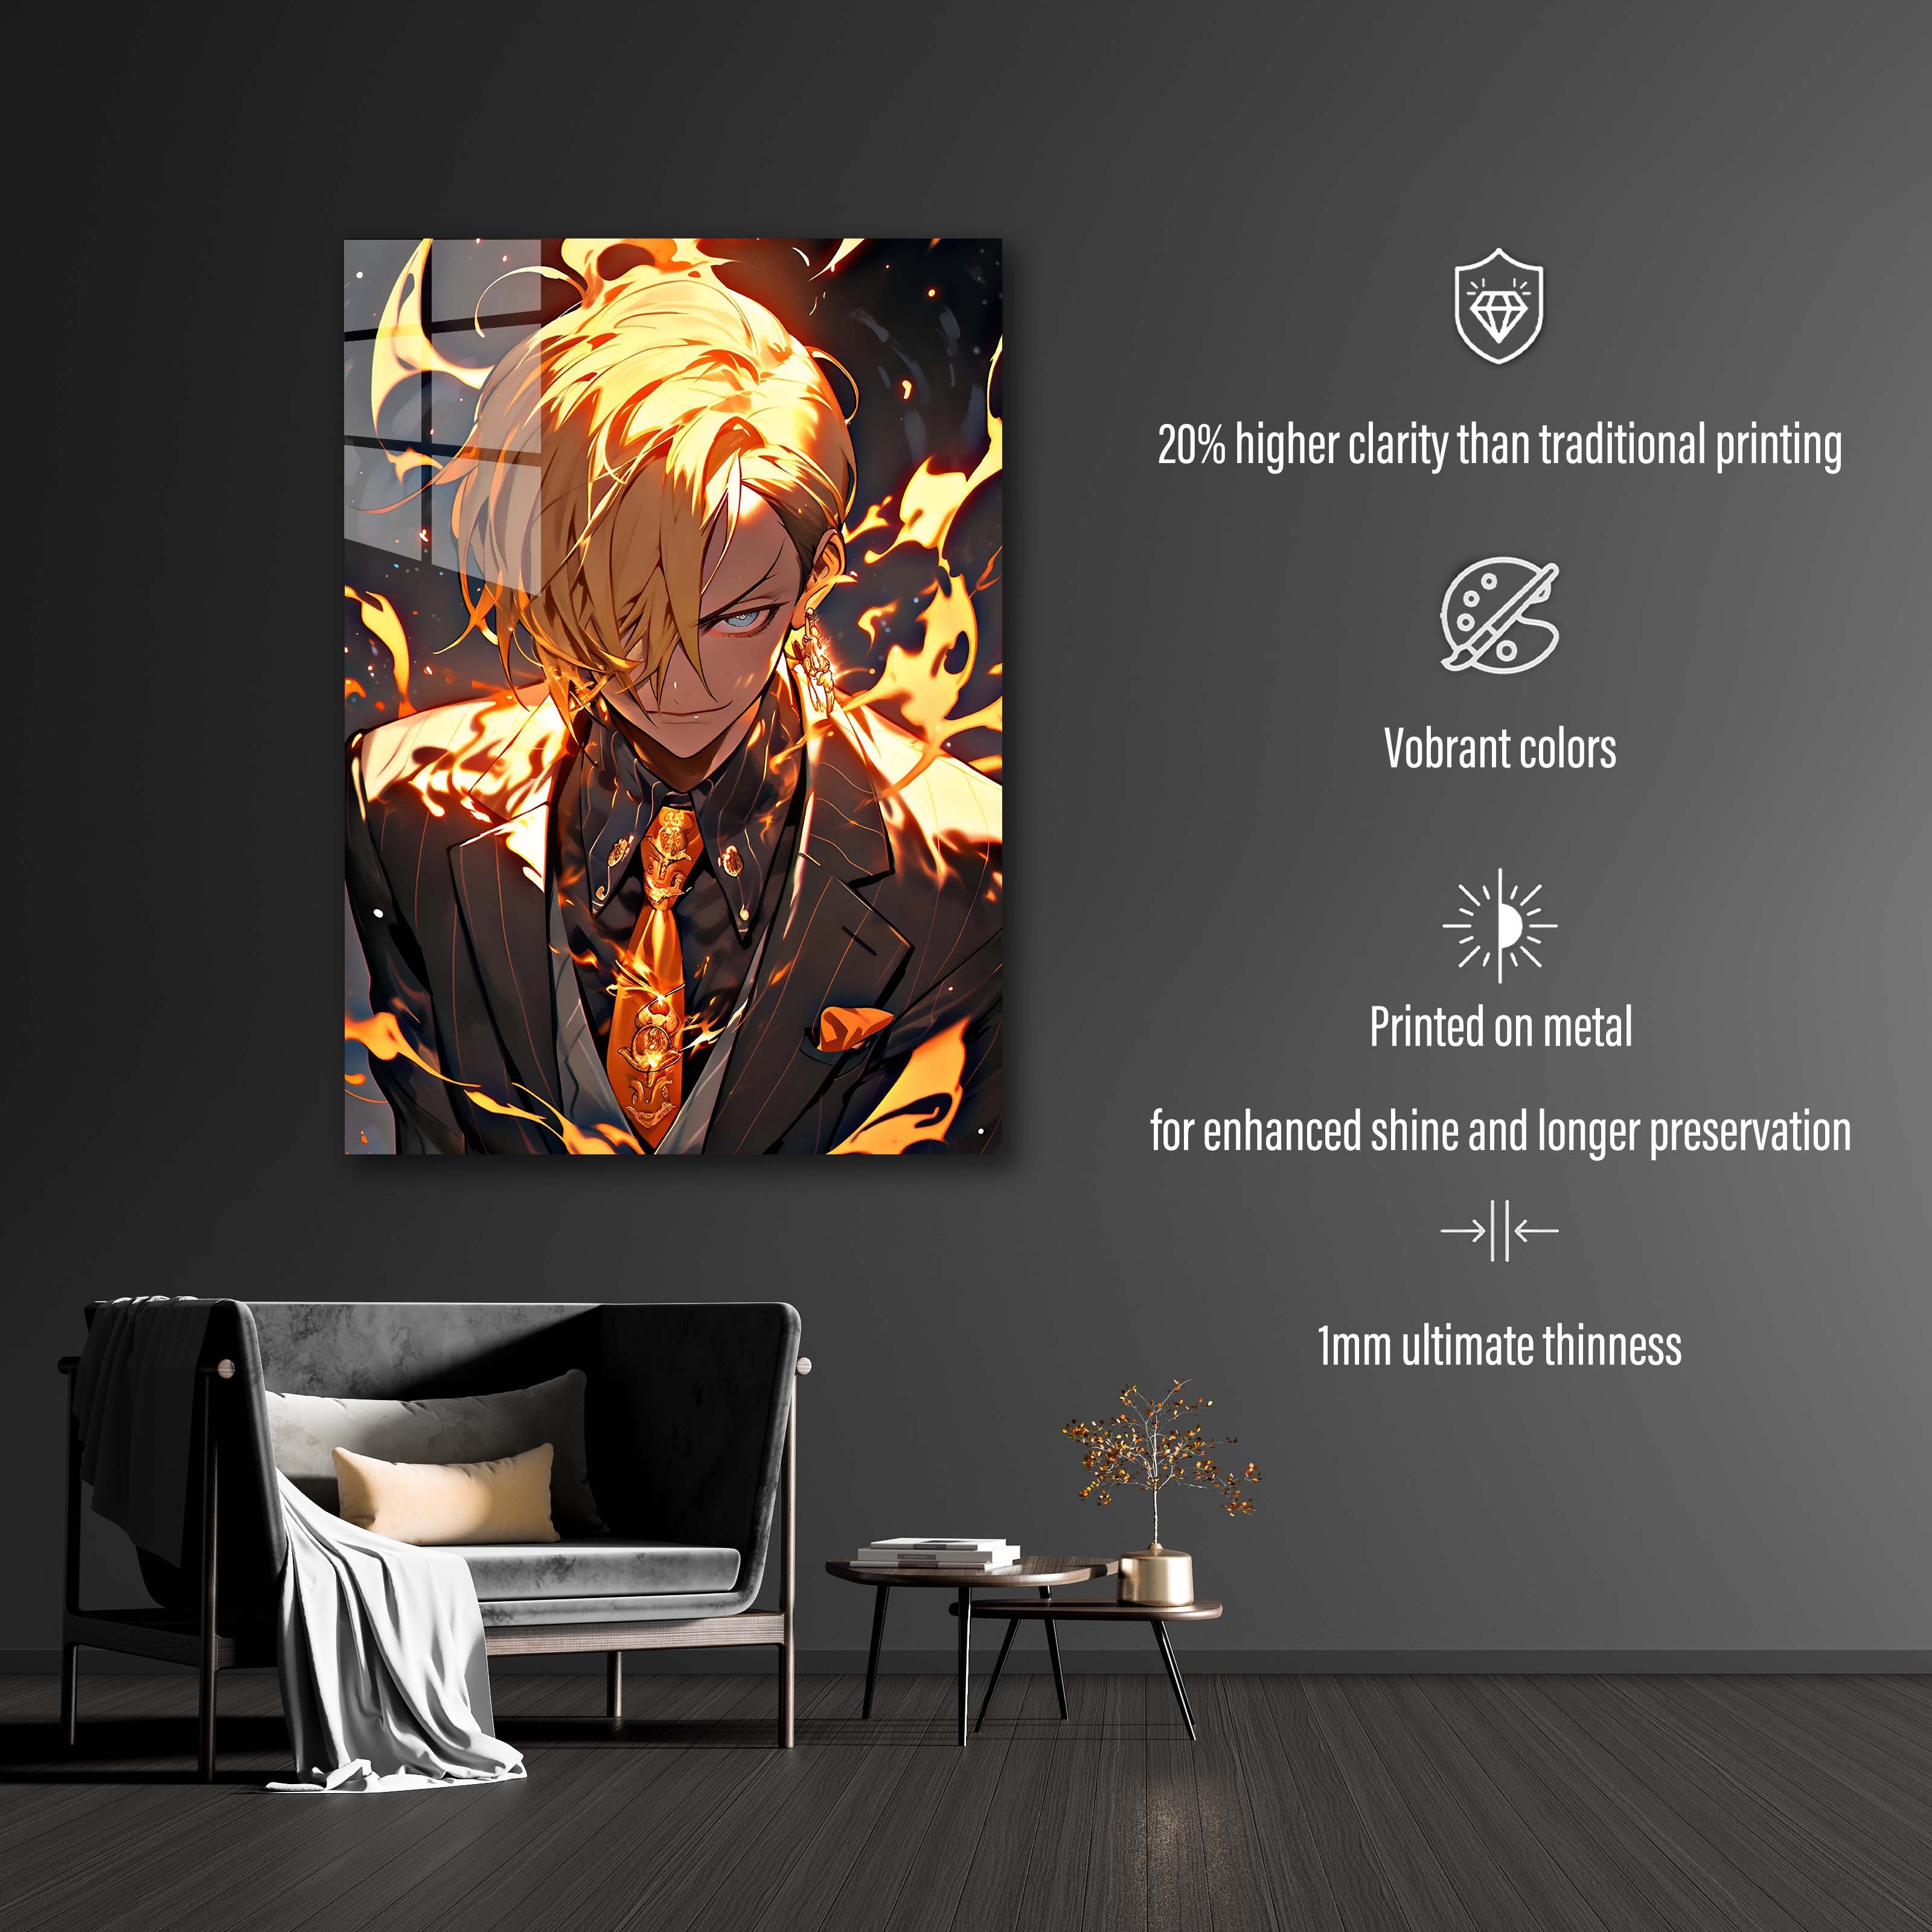 Sanji from One piece -designed by @Vid_M@tion